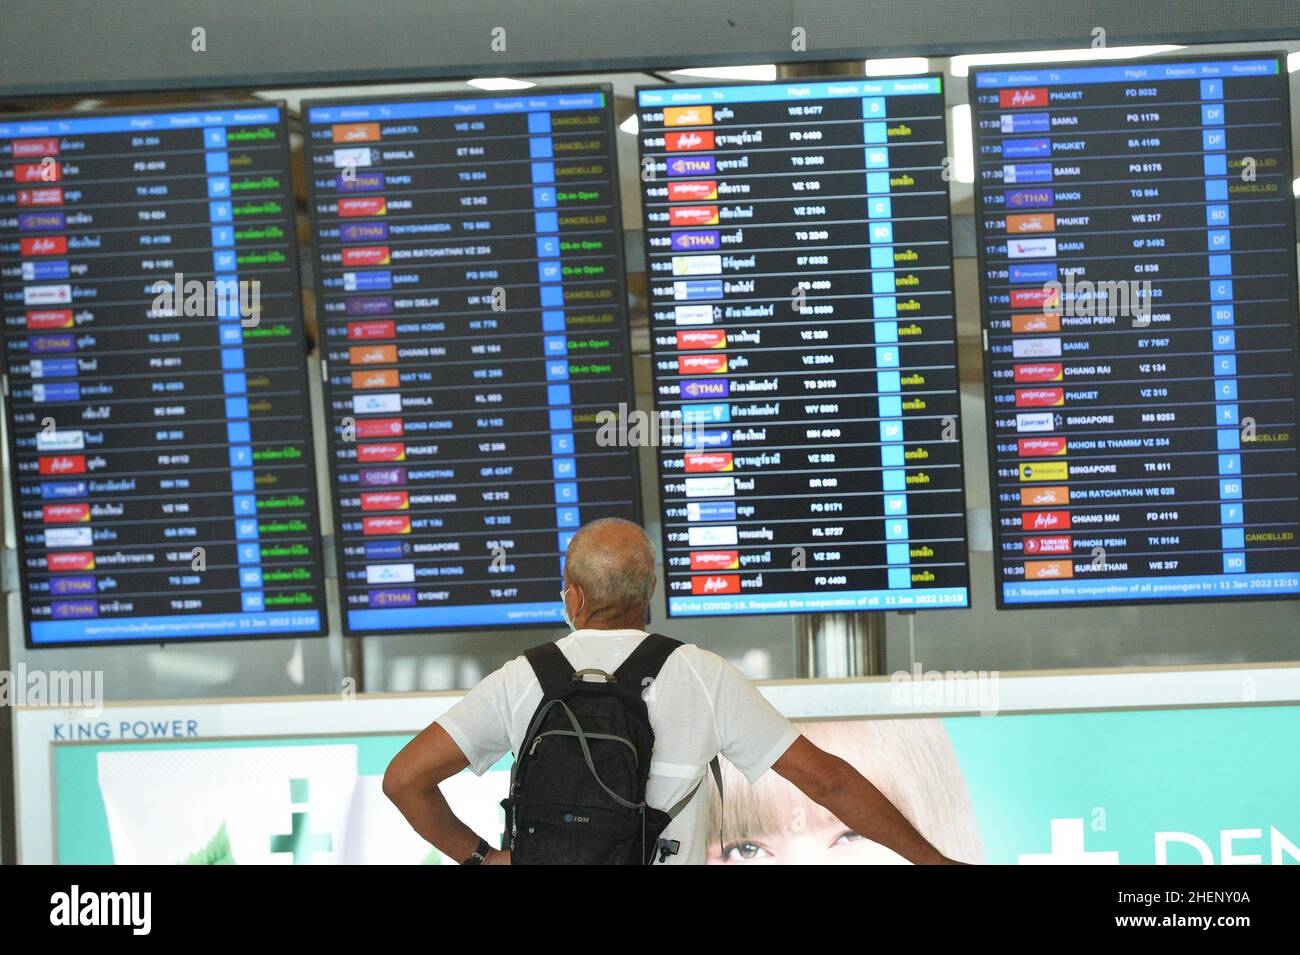 BANGKOK, Jan. 12, 2022 (Xinhua) -- A traveller looks at a flight schedule at the Suvarnabhumi International Airport in Bangkok, Thailand, Jan. 11, 2022. Due to concerns about a new wave of COVID-19 outbreak, Thailand halted the quarantine-free travel scheme from Dec. 22, 2021 and most of its Sandbox Program, which enables quarantine-free entry while requiring visitors to stay in a specific destination for seven days with free movement during their stay, except for the resort island of Phuket. According to the Center for COVID-19 Situation Administration, from Jan. 11 onwards, Tha Stock Photo